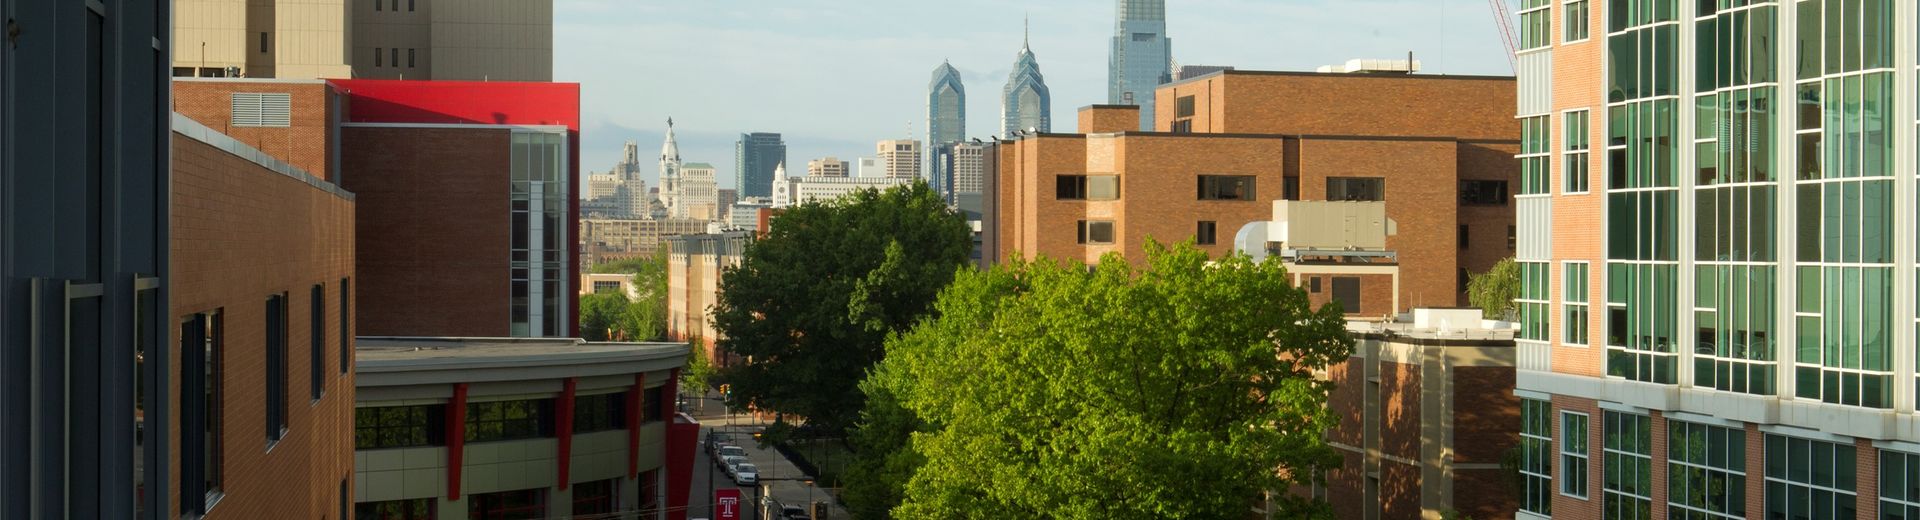 The Temple University campus at dawn with the Center City skyline in the background